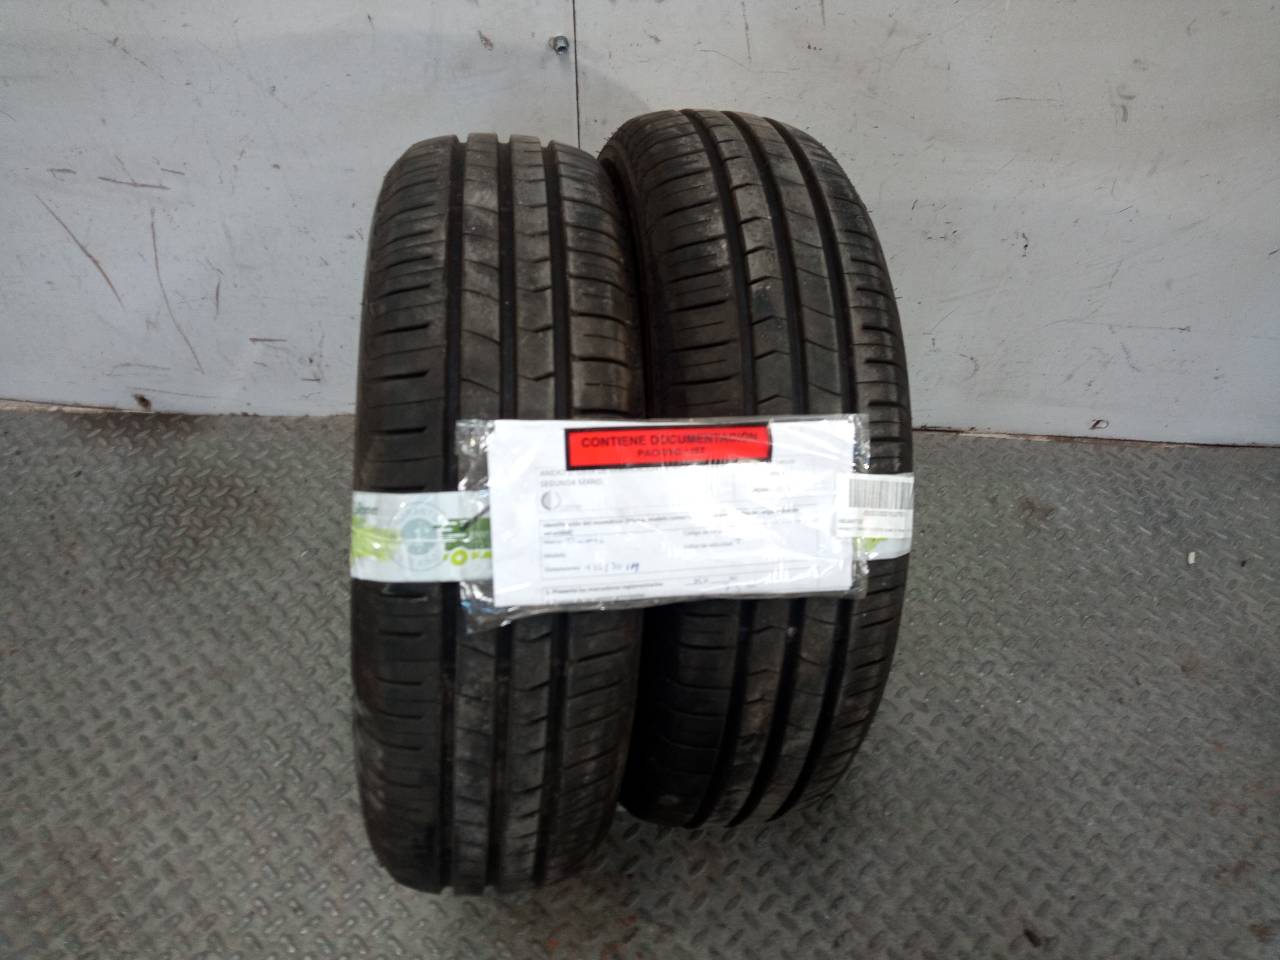 RENAULT Trafic Tire 23708064